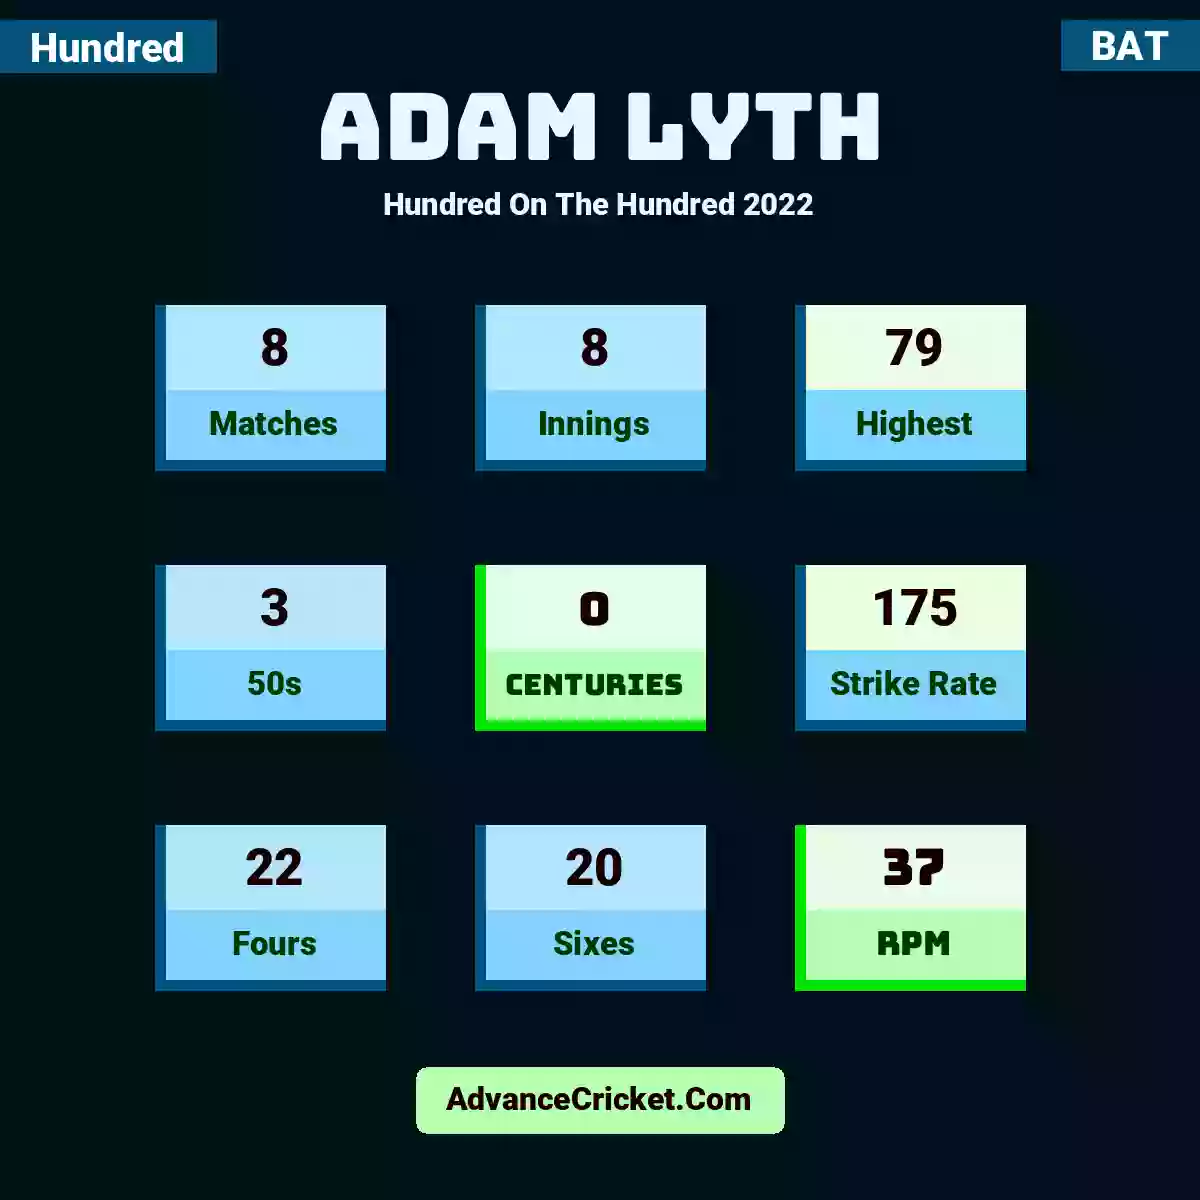 Adam Lyth Hundred  On The Hundred 2022, Adam Lyth played 8 matches, scored 79 runs as highest, 3 half-centuries, and 0 centuries, with a strike rate of 175. A.Lyth hit 22 fours and 20 sixes, with an RPM of 37.